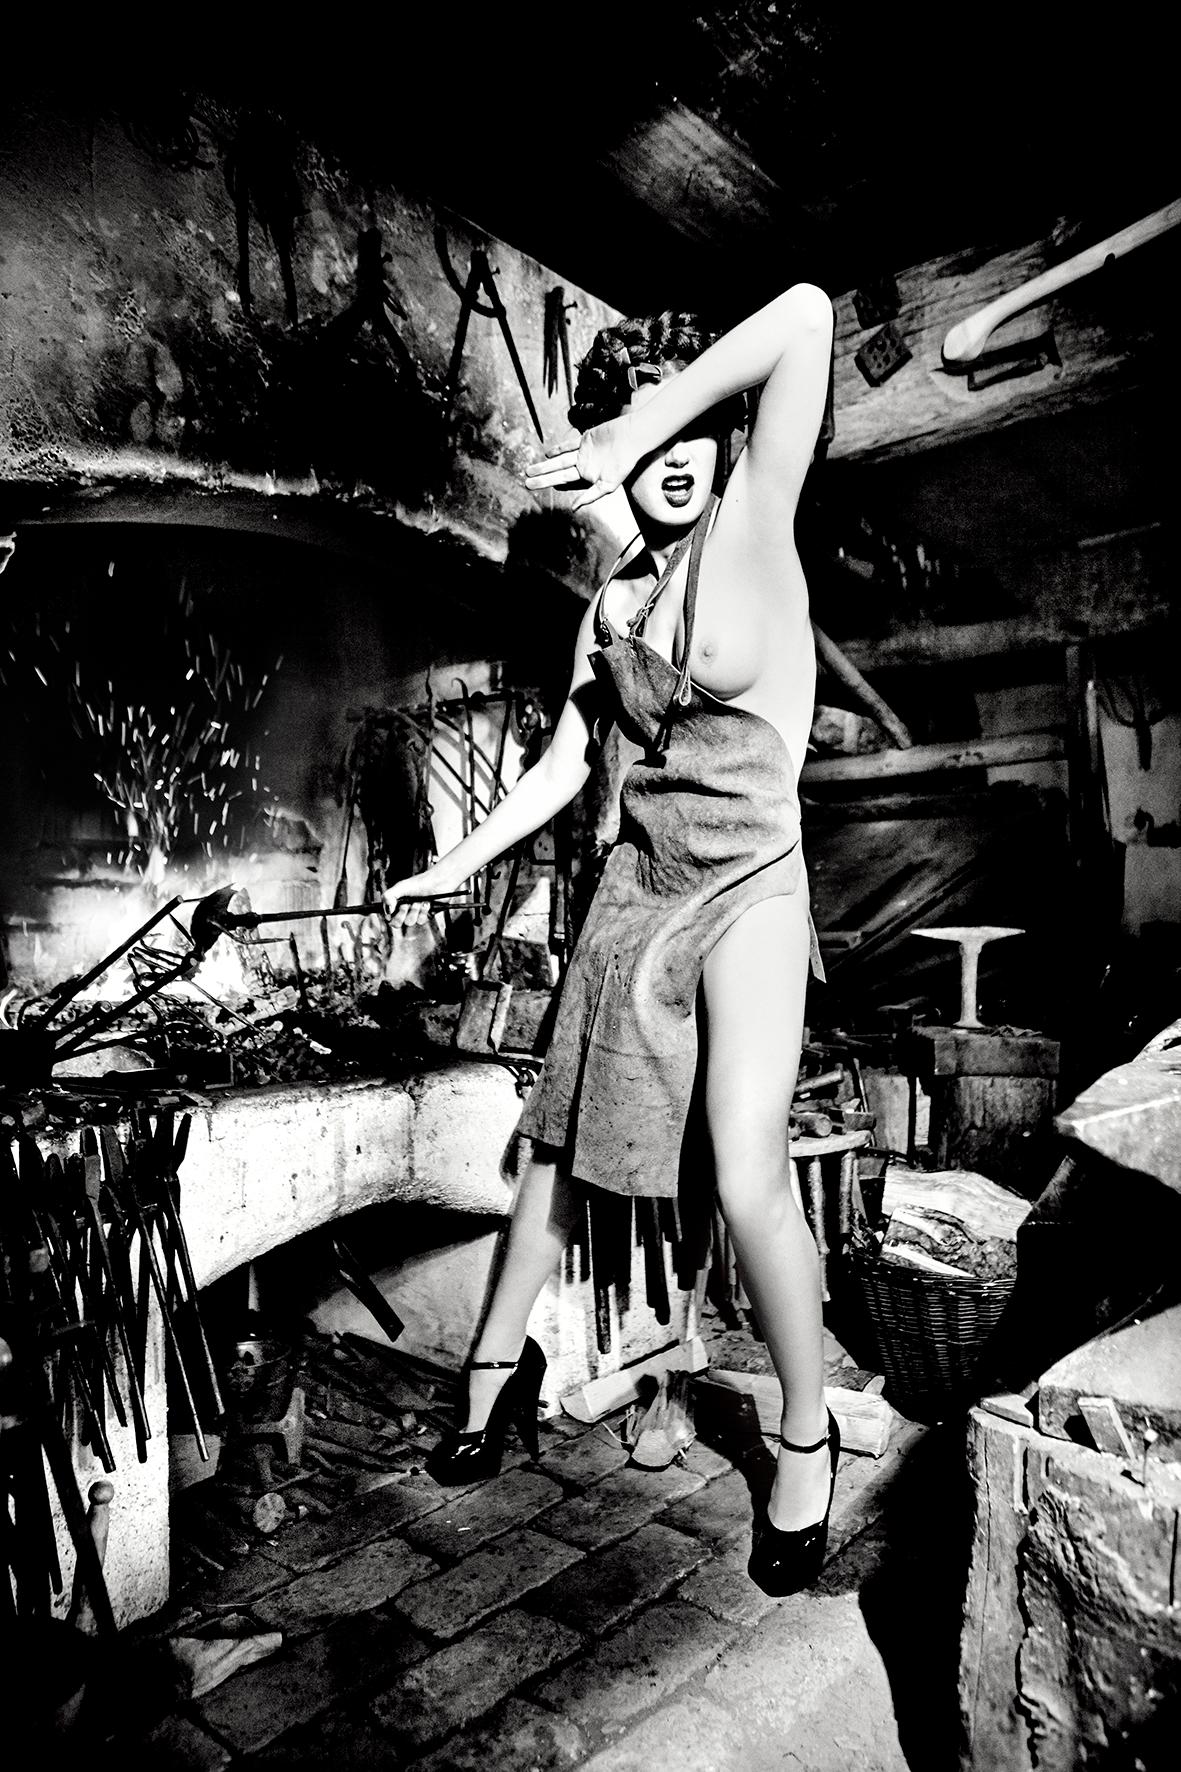 Ellen von Unwerth Nude Photograph - Fired Up from Heimat - Nude Model in Apron working, fine art photography, 2015